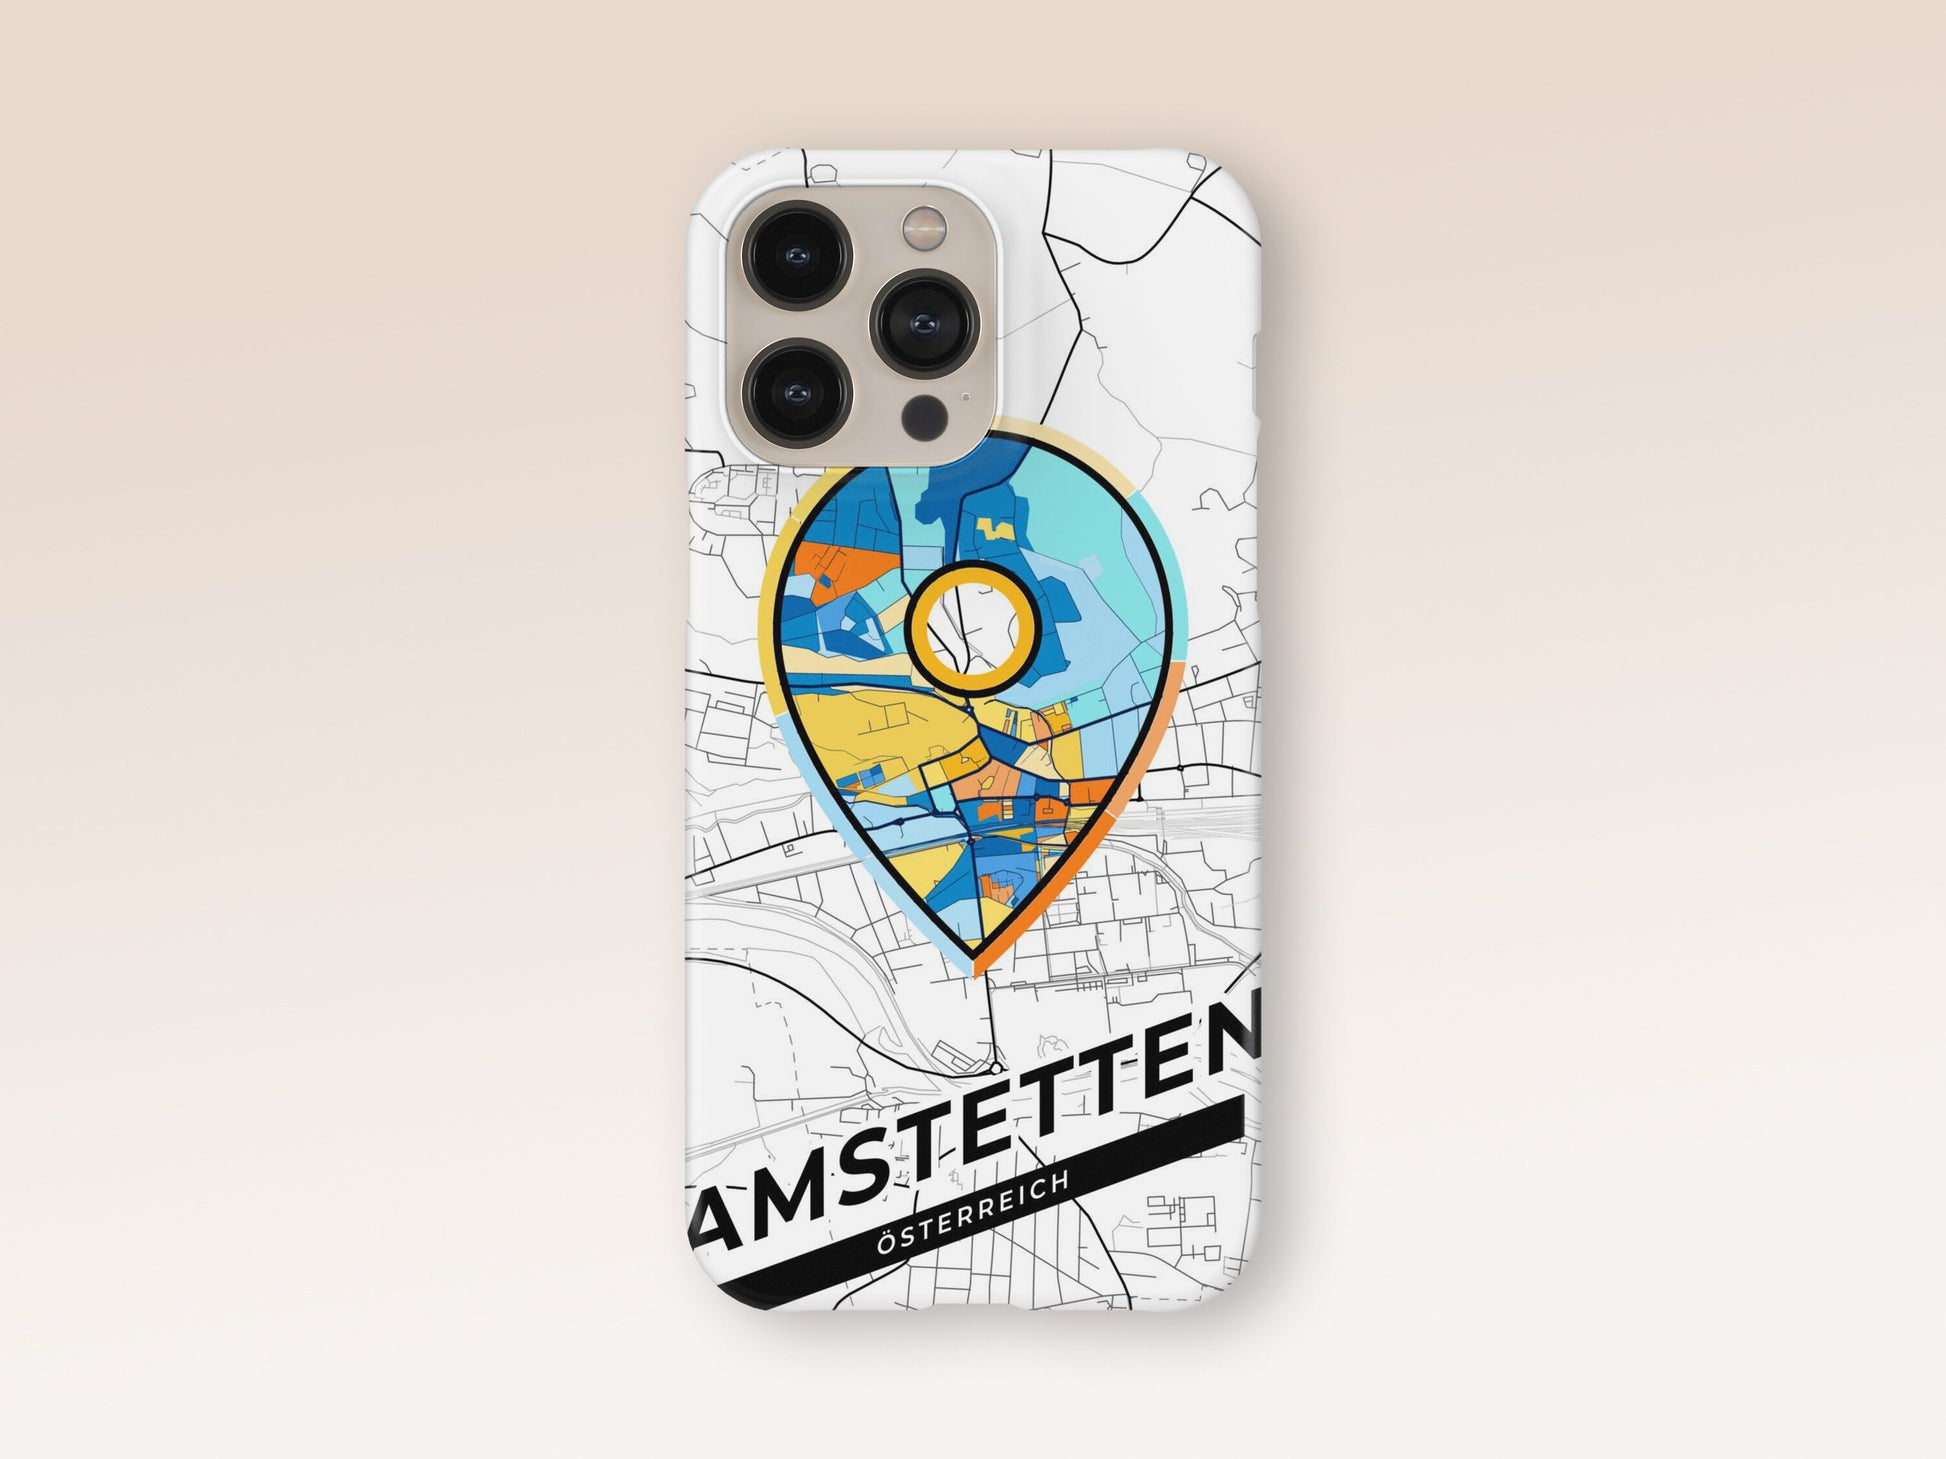 Amstetten Österreich slim phone case with colorful icon. Birthday, wedding or housewarming gift. Couple match cases. 1